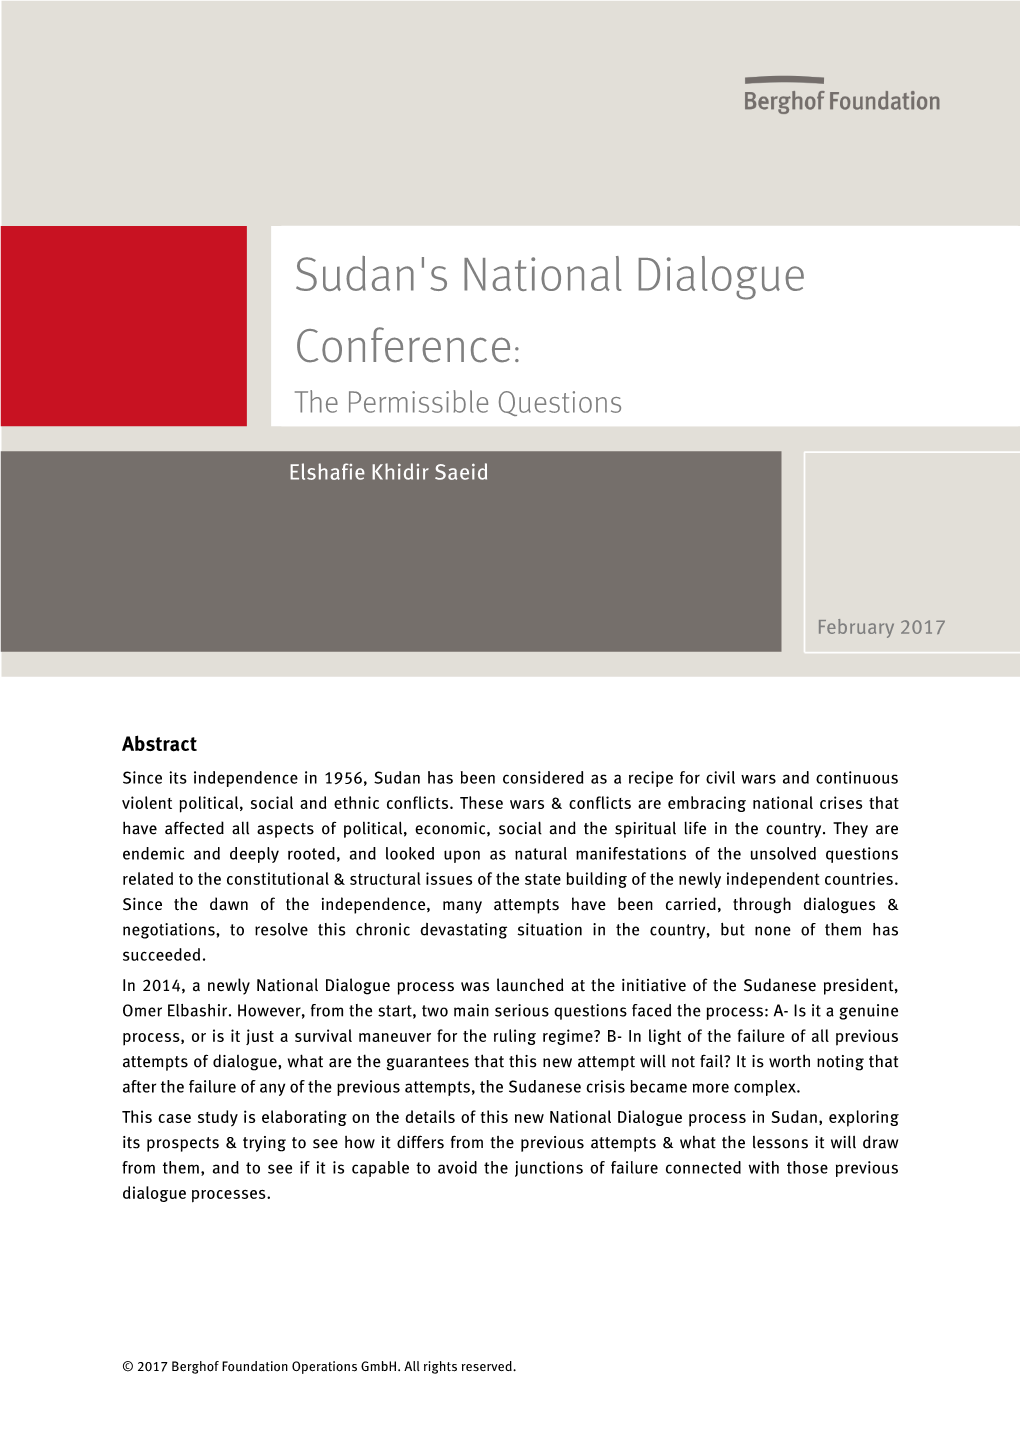 Sudan's National Dialogue Conference: the Permissible Questions